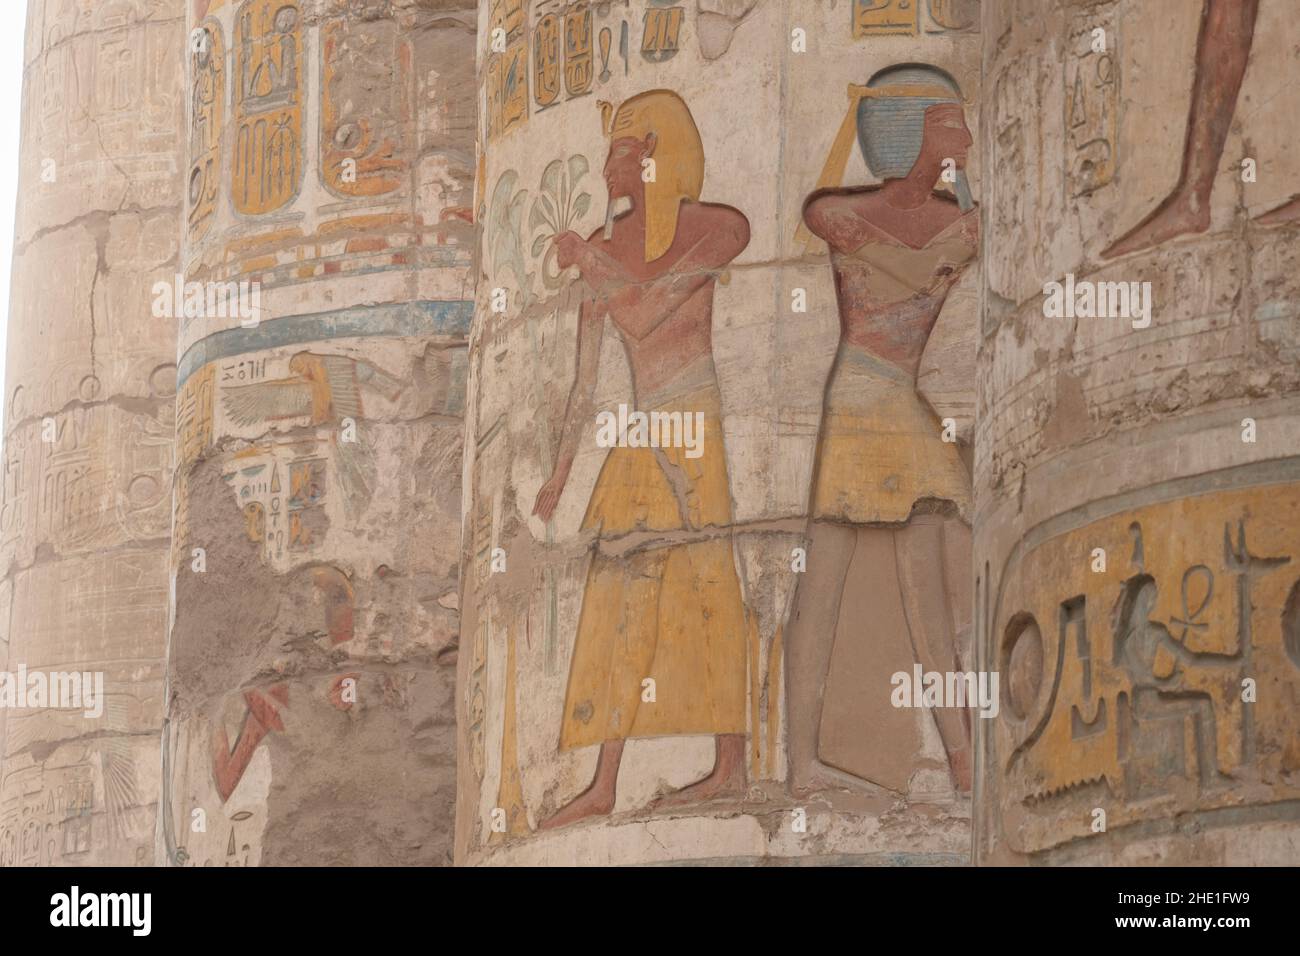 Ancient egyptian relief sculptures that have remained well preserved and painted on the columns in the Hypostyle hall in Karnak, Egypt. Stock Photo